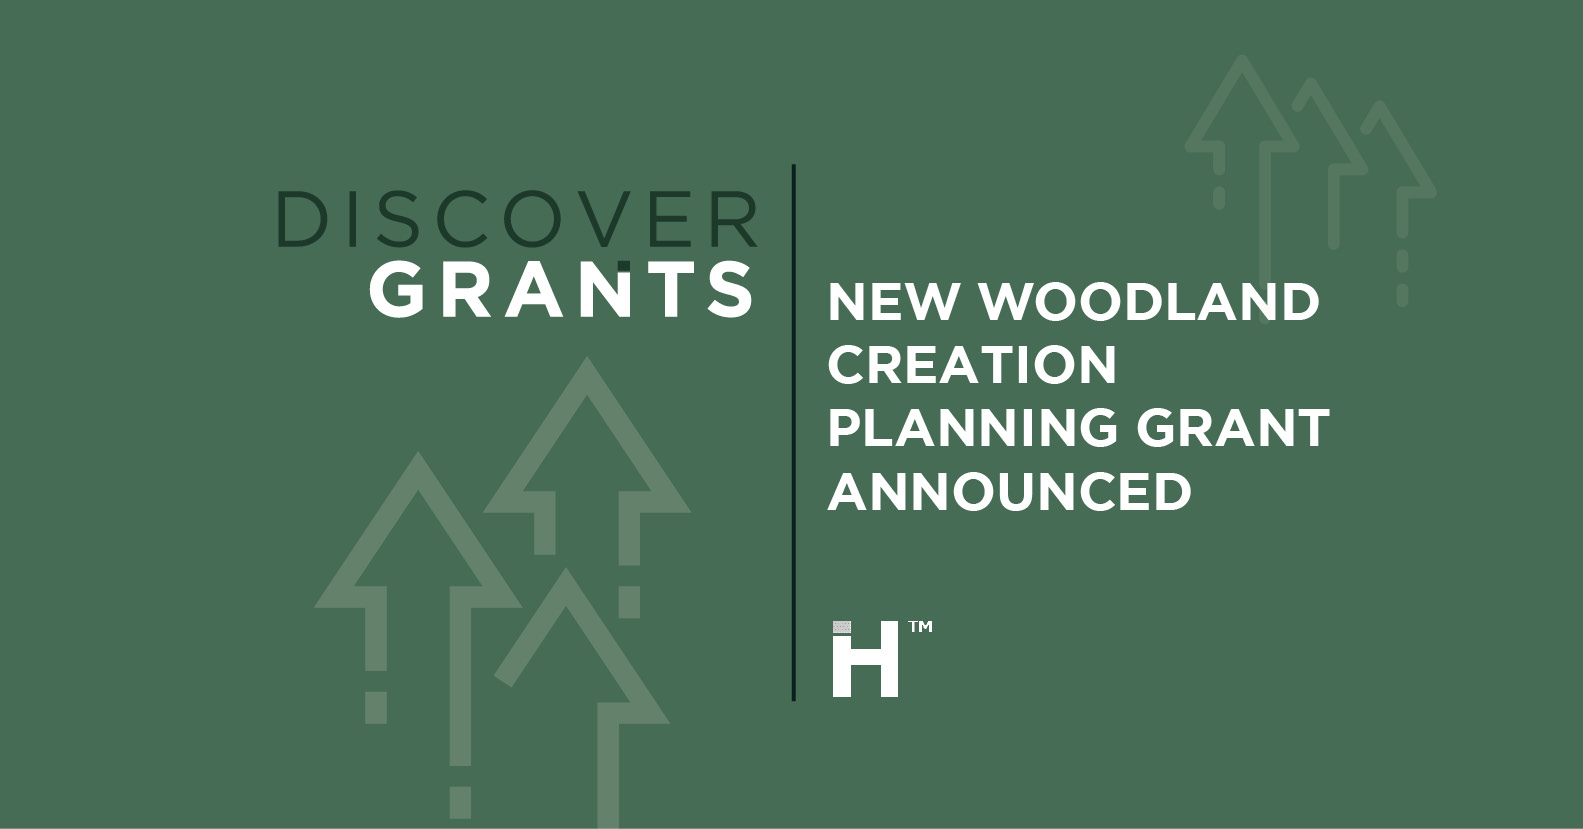 New Woodland Creation Planning Grant Announced